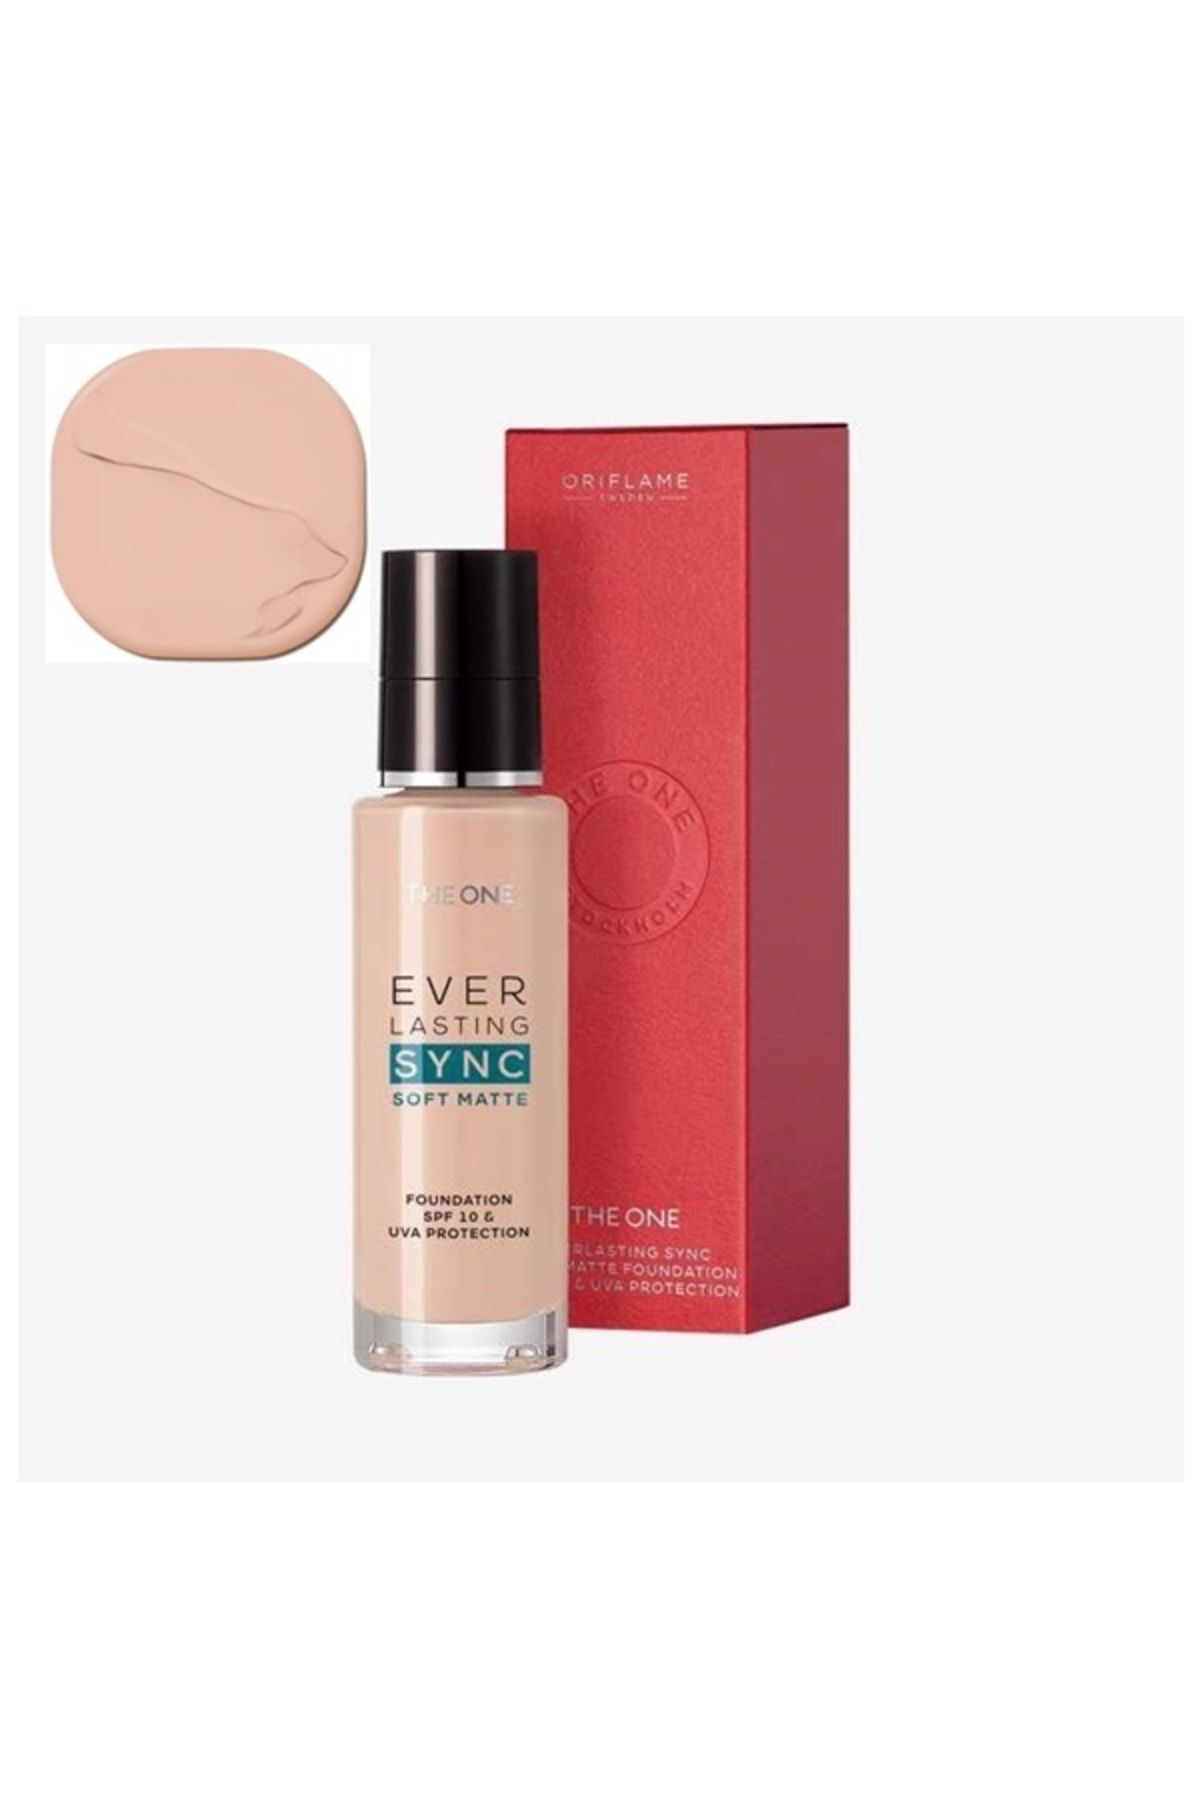 ORIFLAME THE ONE EVERLASTING SYNC SOFT MATTE FOUNDATION SPF 10